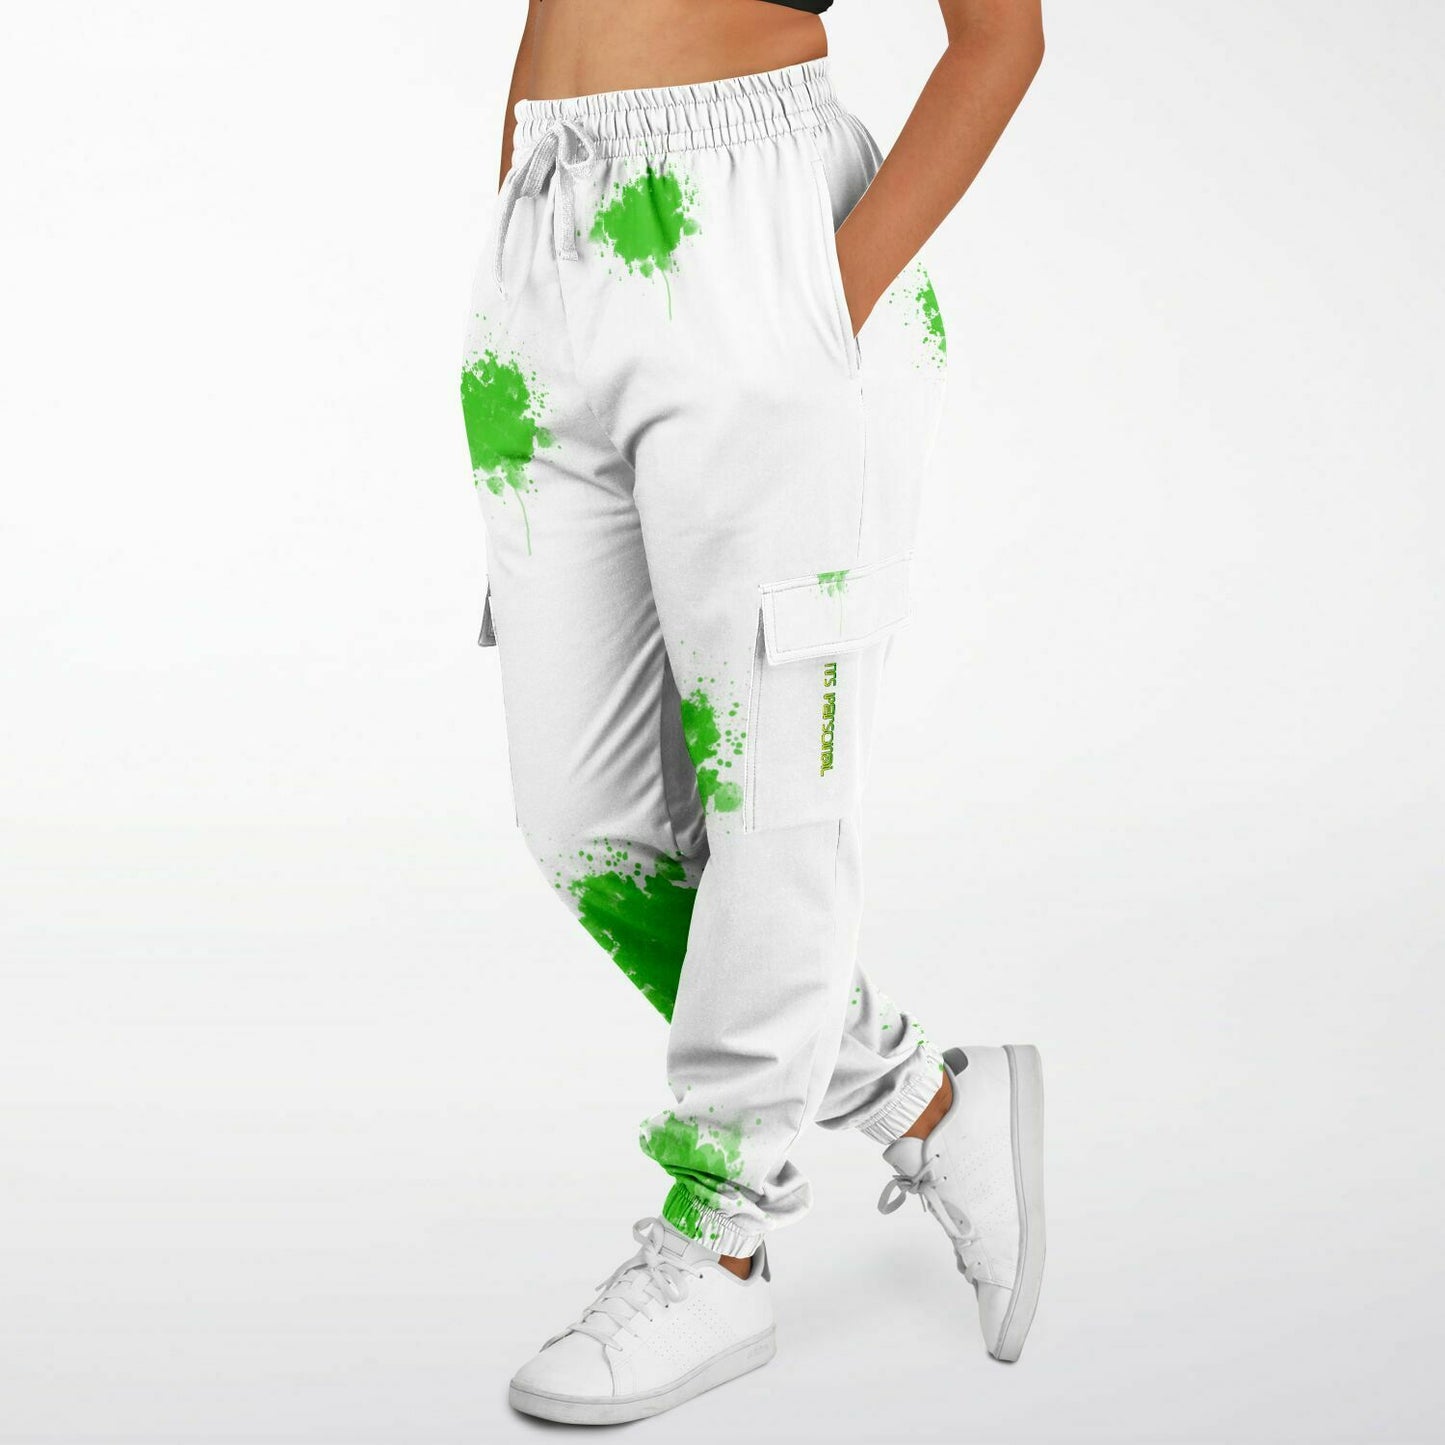 It's Personal White Sweat Pants with Greem Paint Splash- Green and Yellow Text